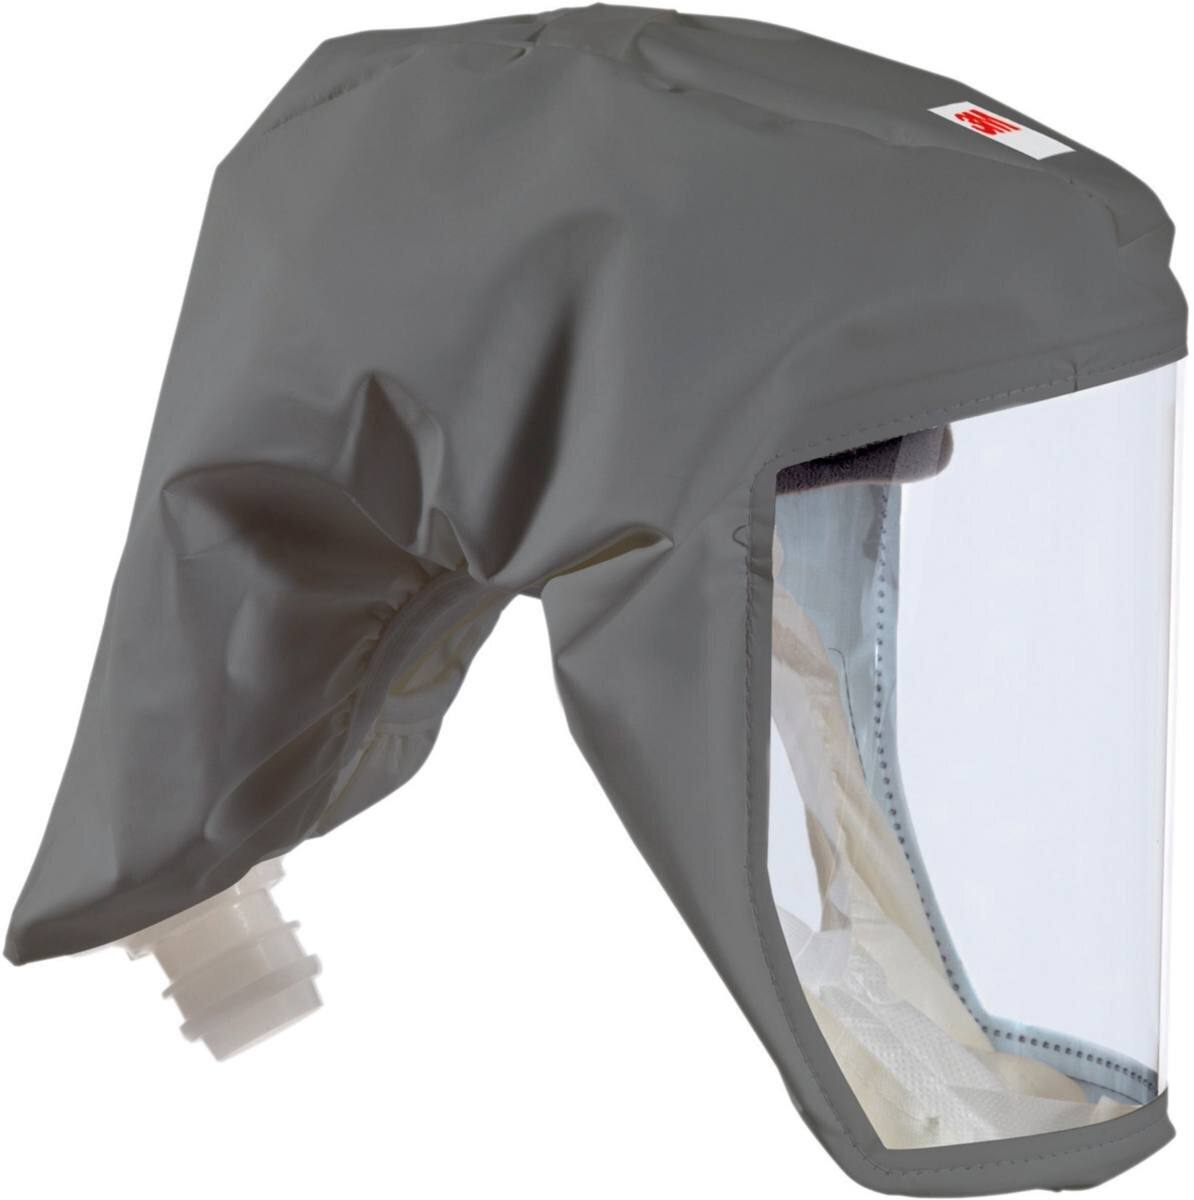 3M Versaflo disposable lightweight hood S333LG with integrated head holder, gray, robust, crackle-free and low-lint material, size M/L Material: Ventflex